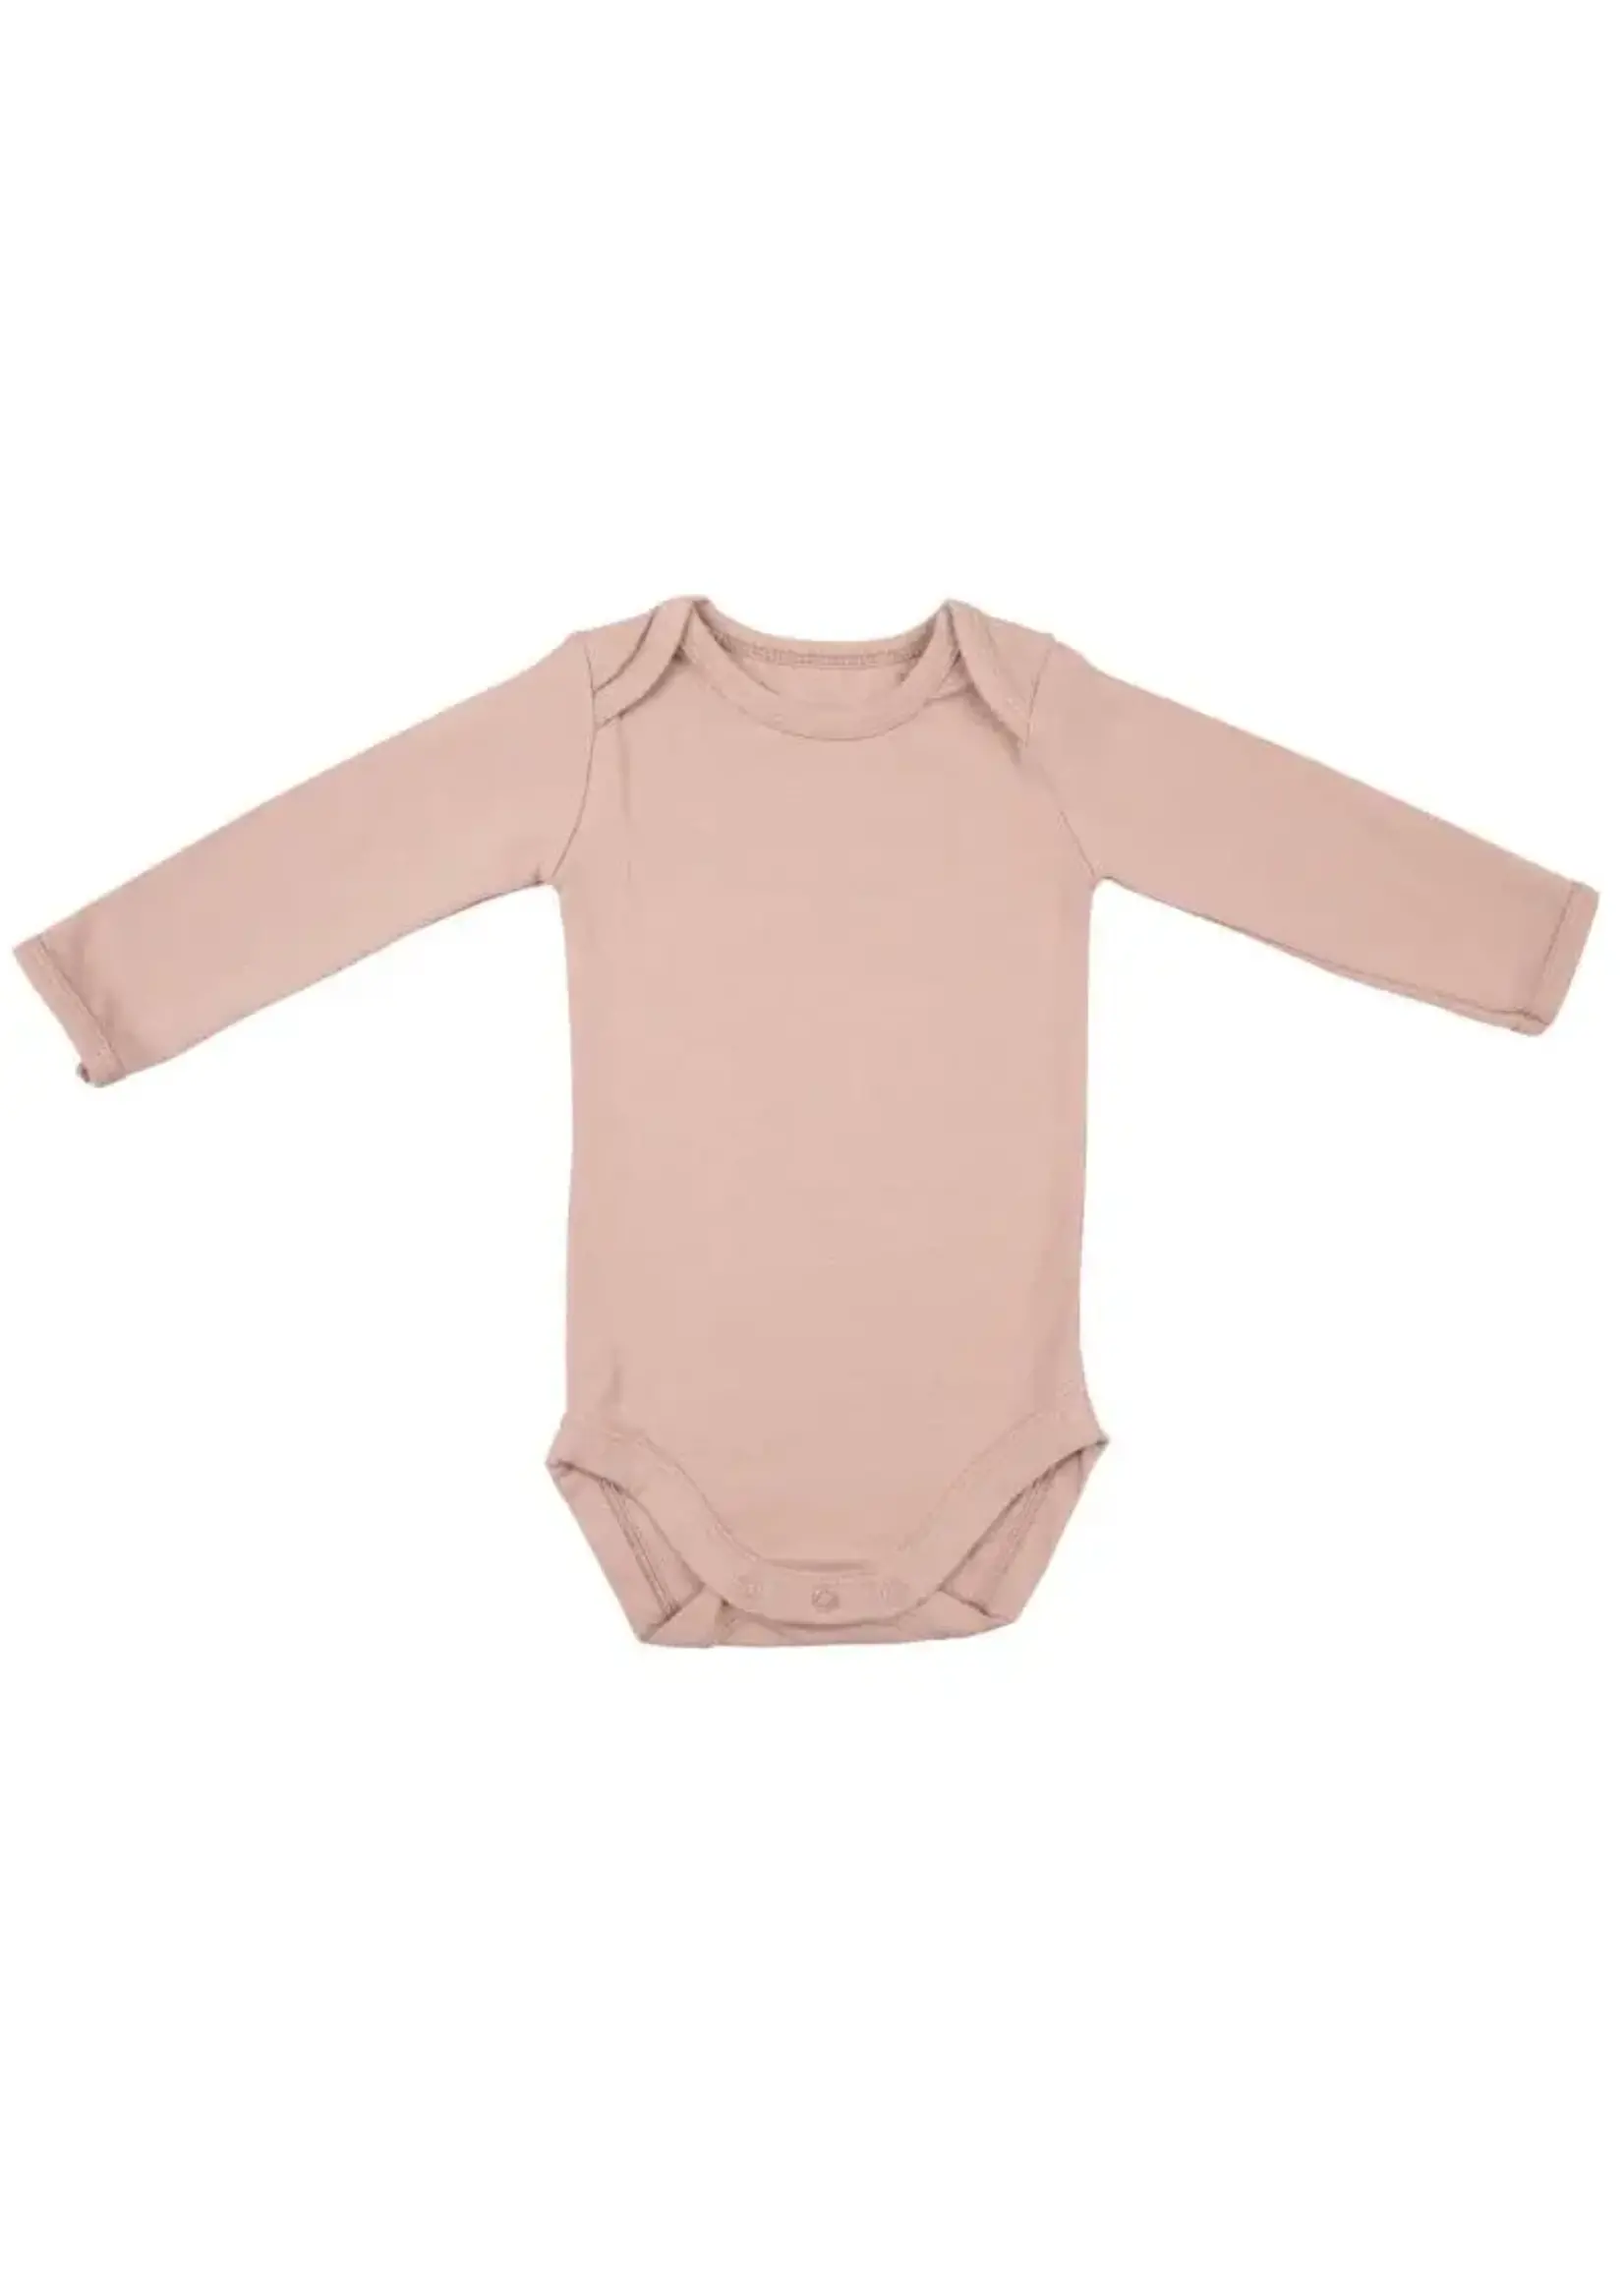 Timboo Timboo Misty rose romper LM